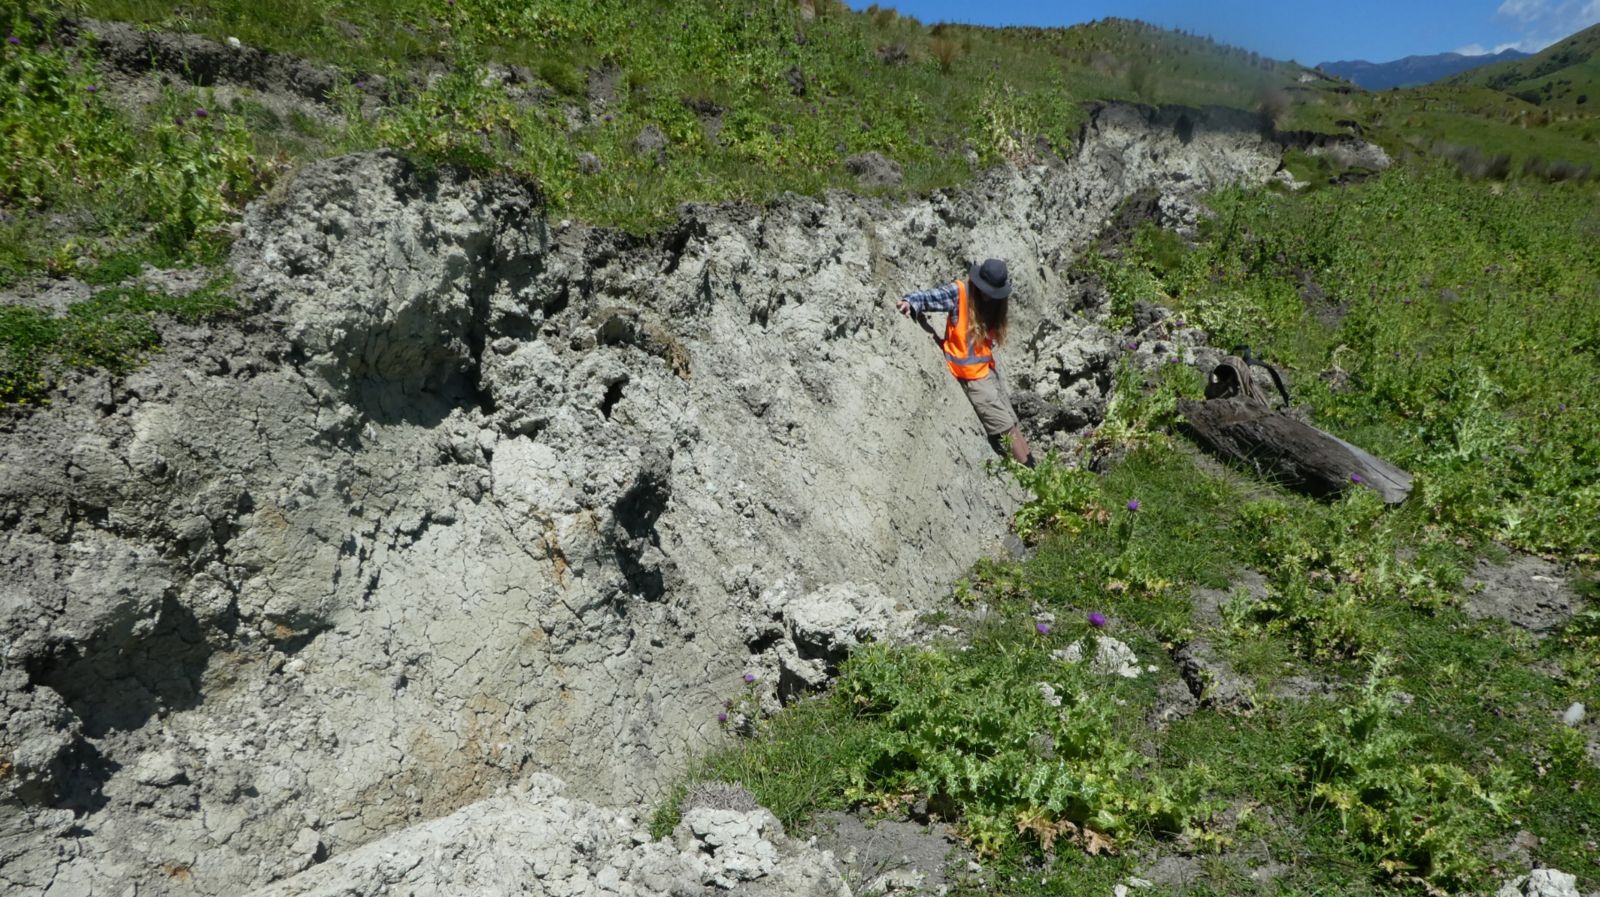 Jesse leaning against the fresh fault scarp of the Kekerengu fault, next to some of the curved slickenlines. Photo by Professor Tim Little.